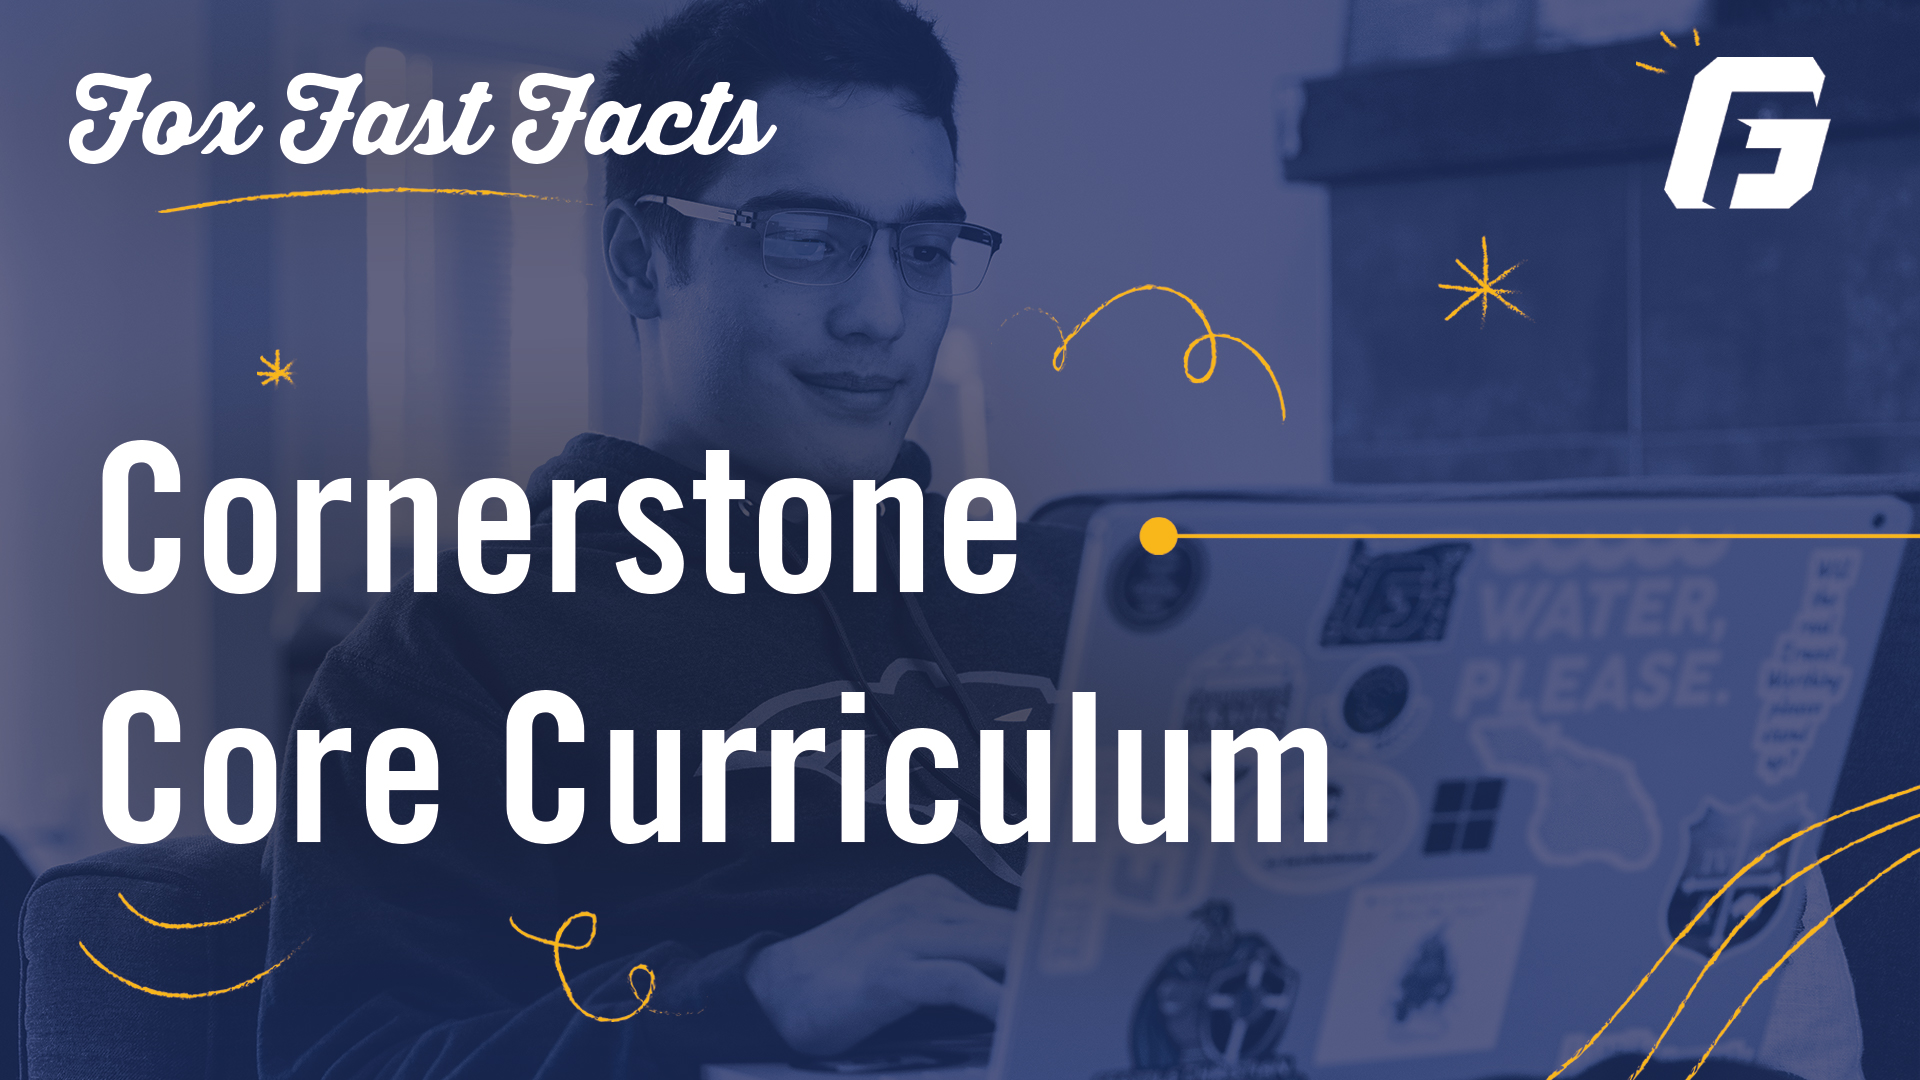 Watch video: What is the Cornerstone Core Curriculum? | Fox Fast Facts